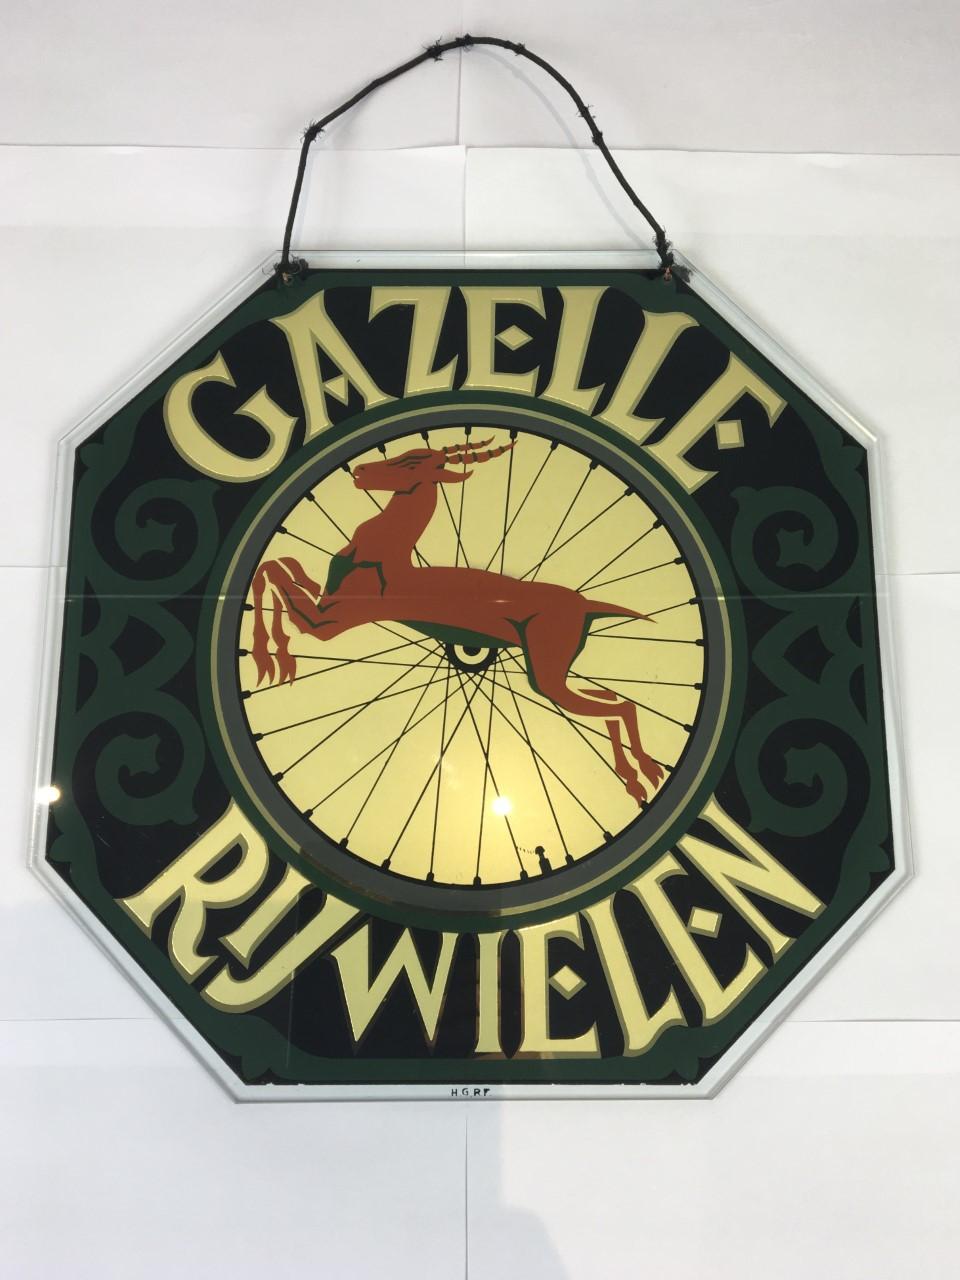 Art Deco Gazelle Bicycles Glass Advertising Sign  For Sale